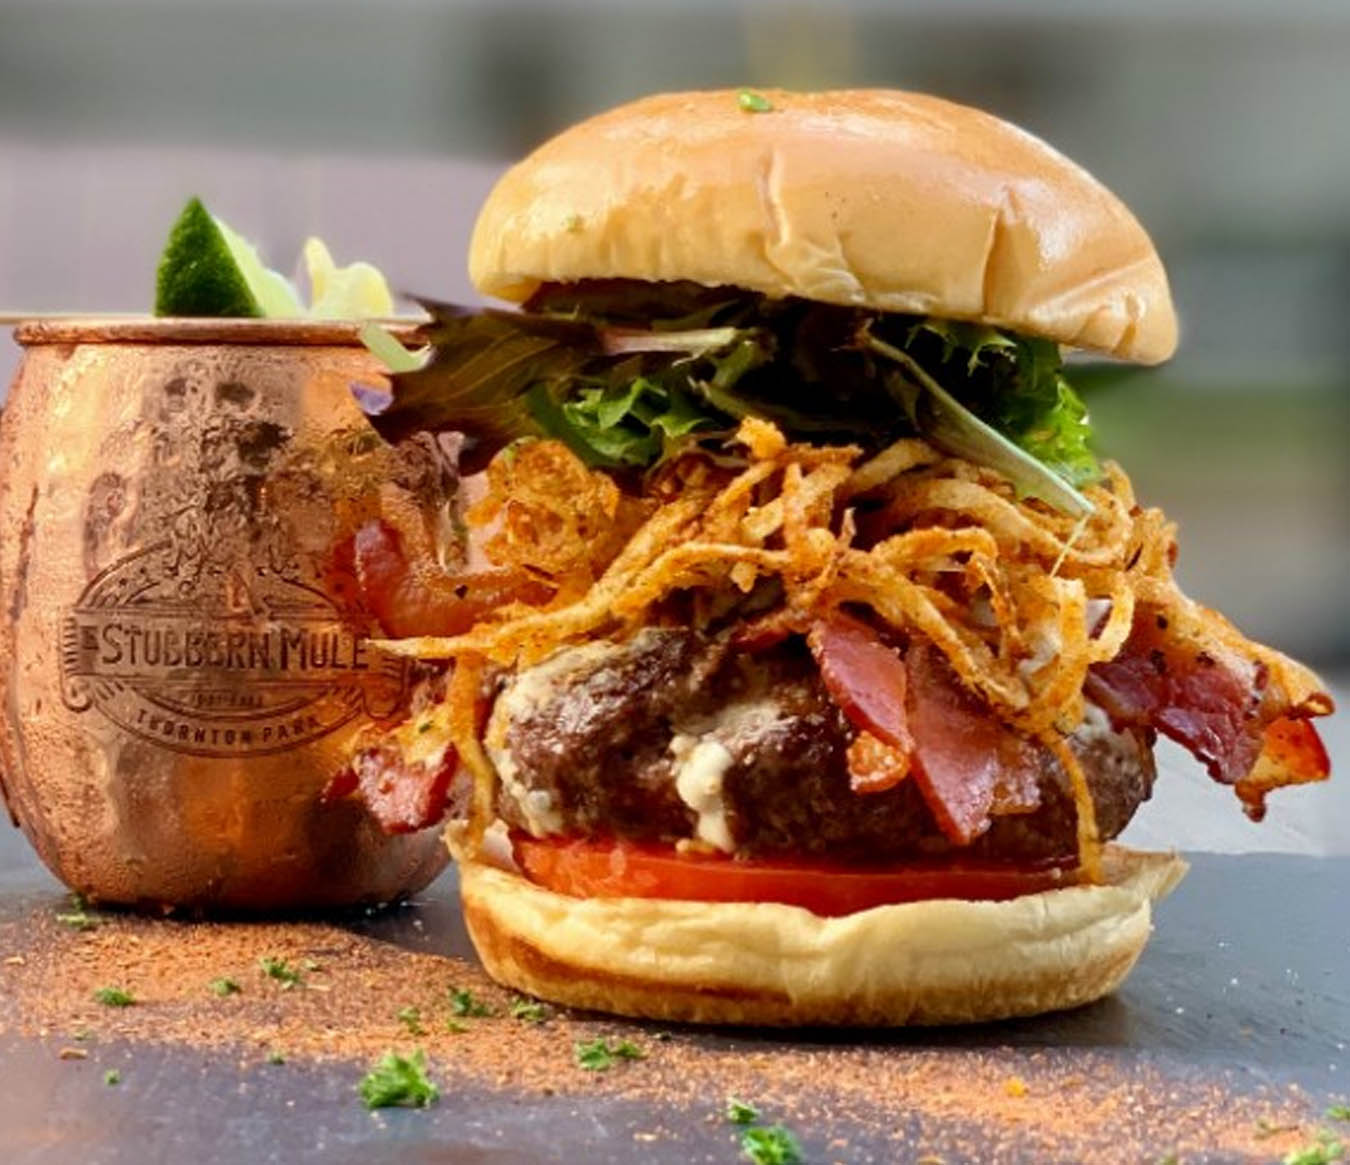 Where to Eat In Orlando - The Stubborn Mule